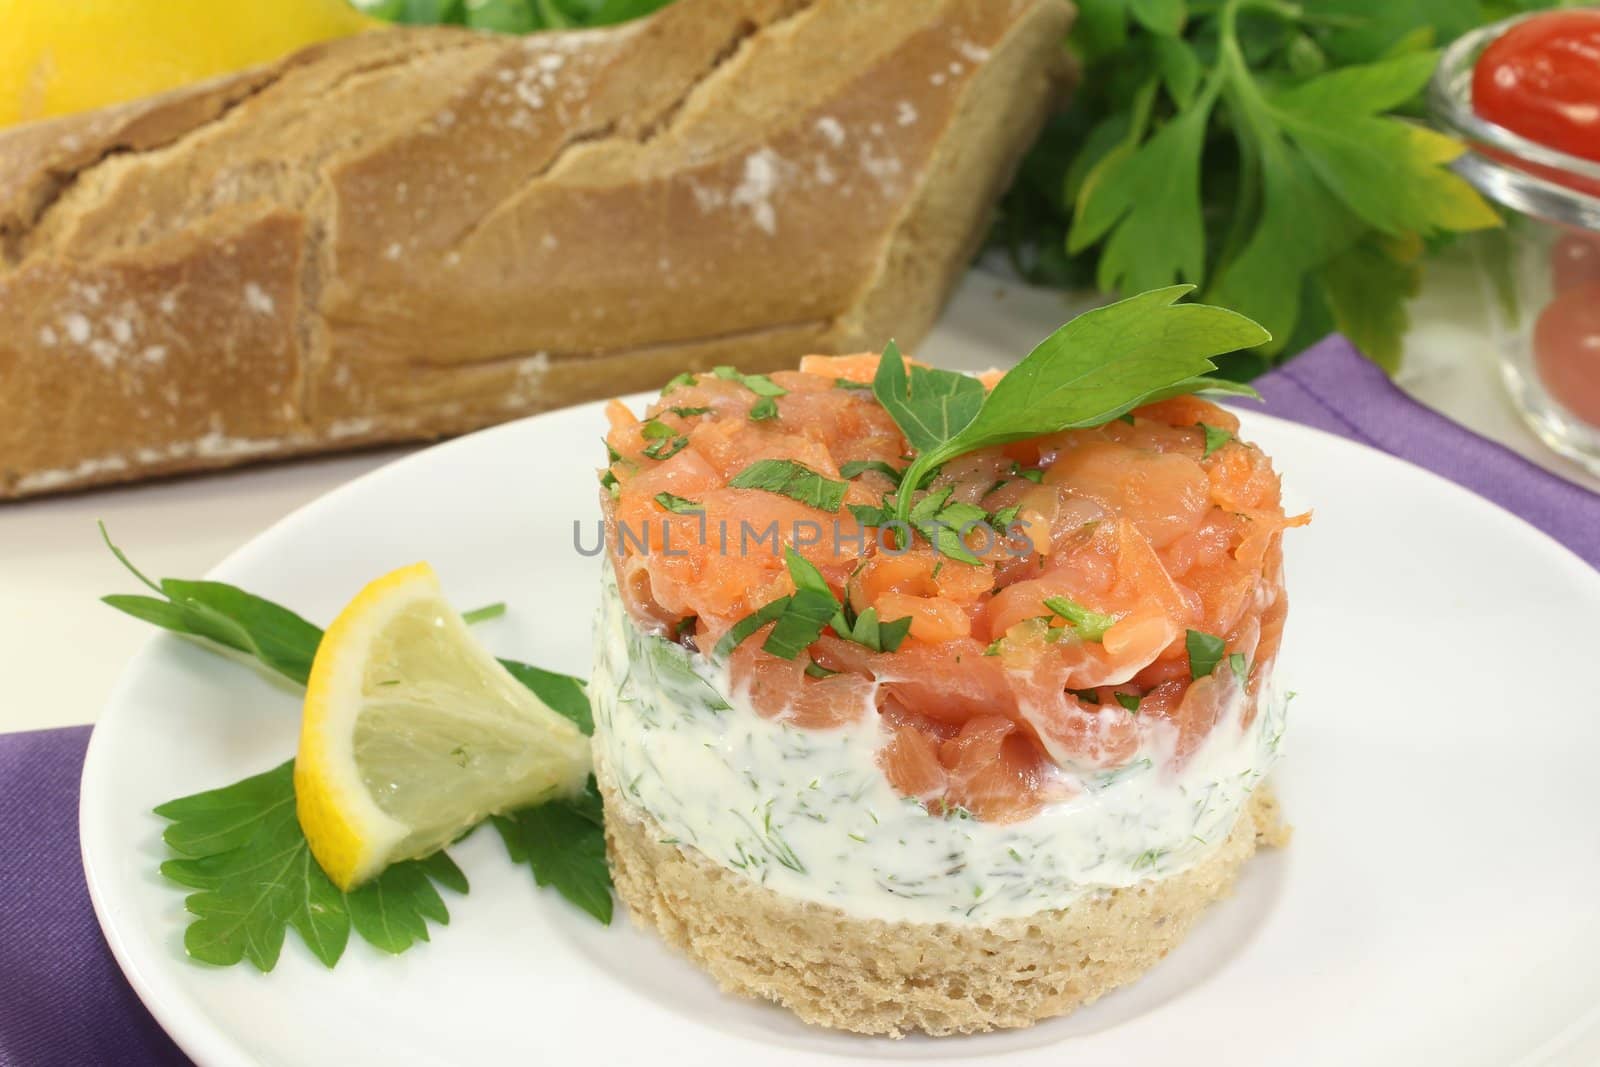 a slice of bread with herb cream and salmon tartare